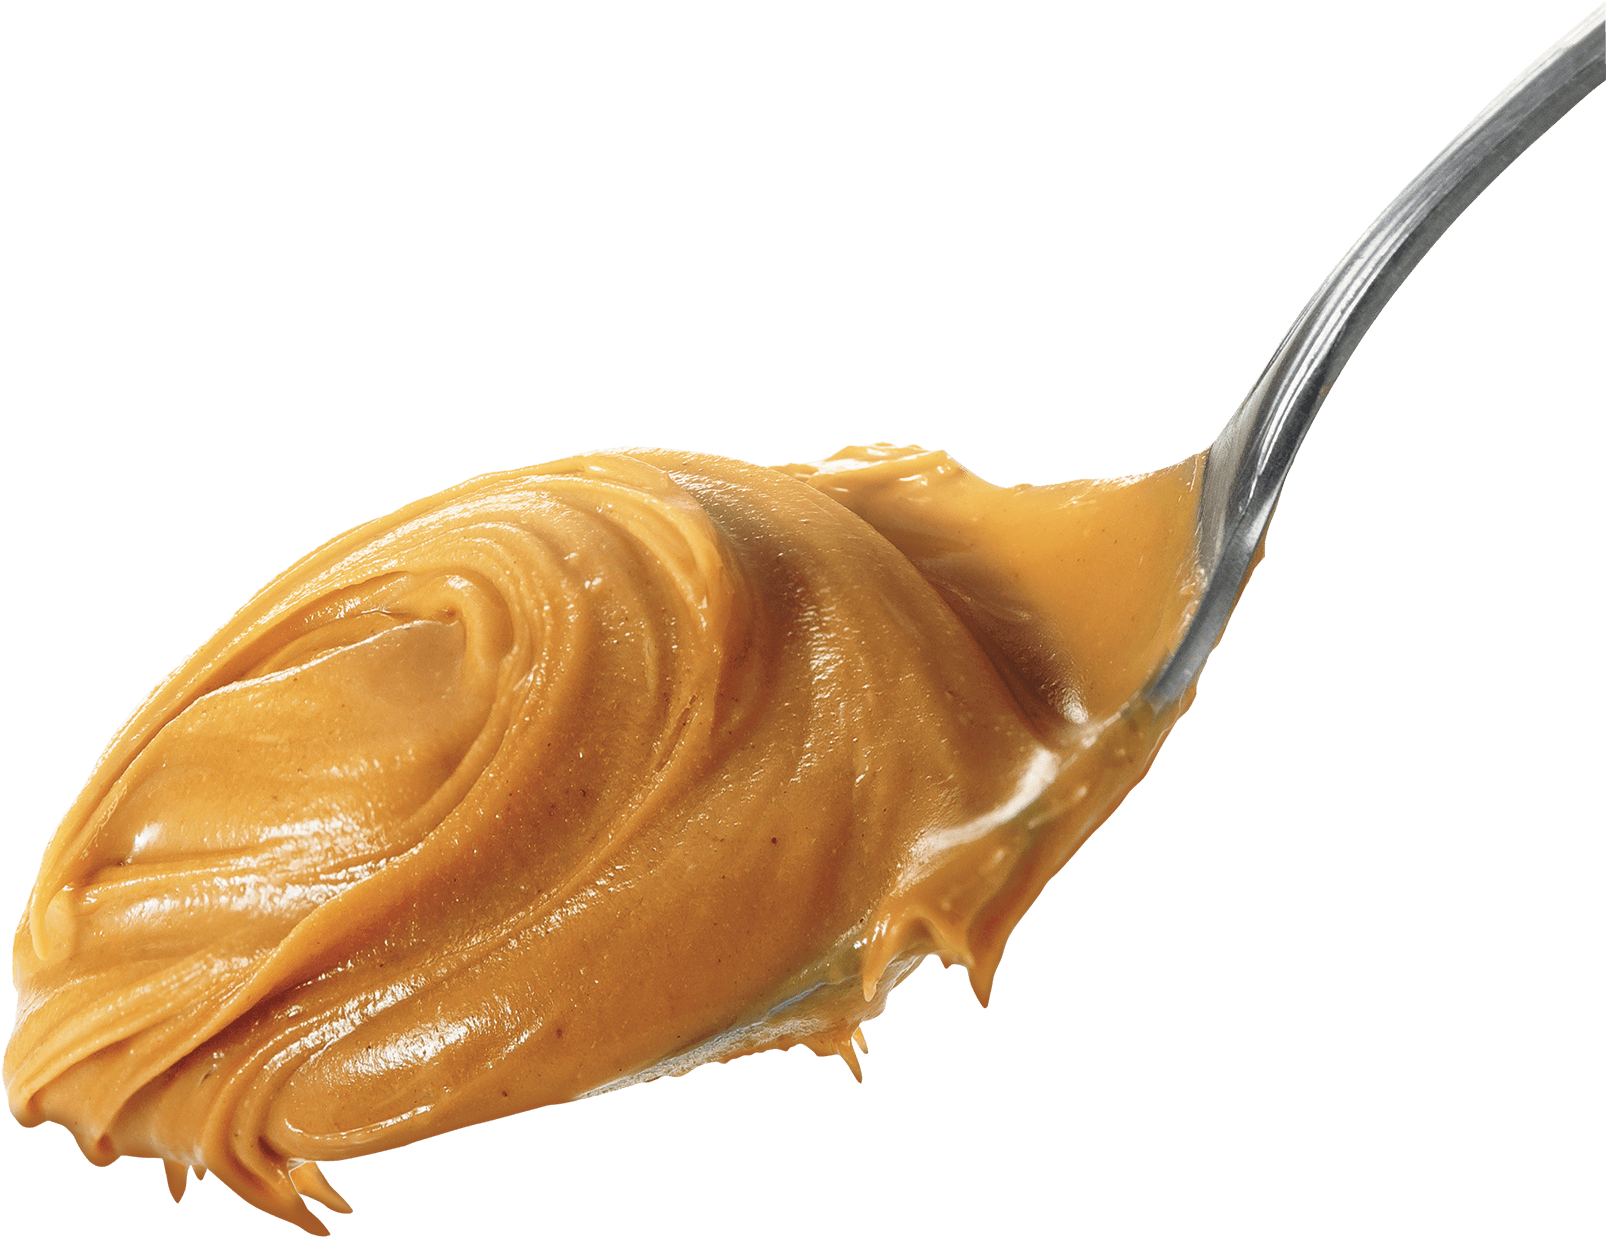 Peanut-Butter-PNG-Image-Background.png